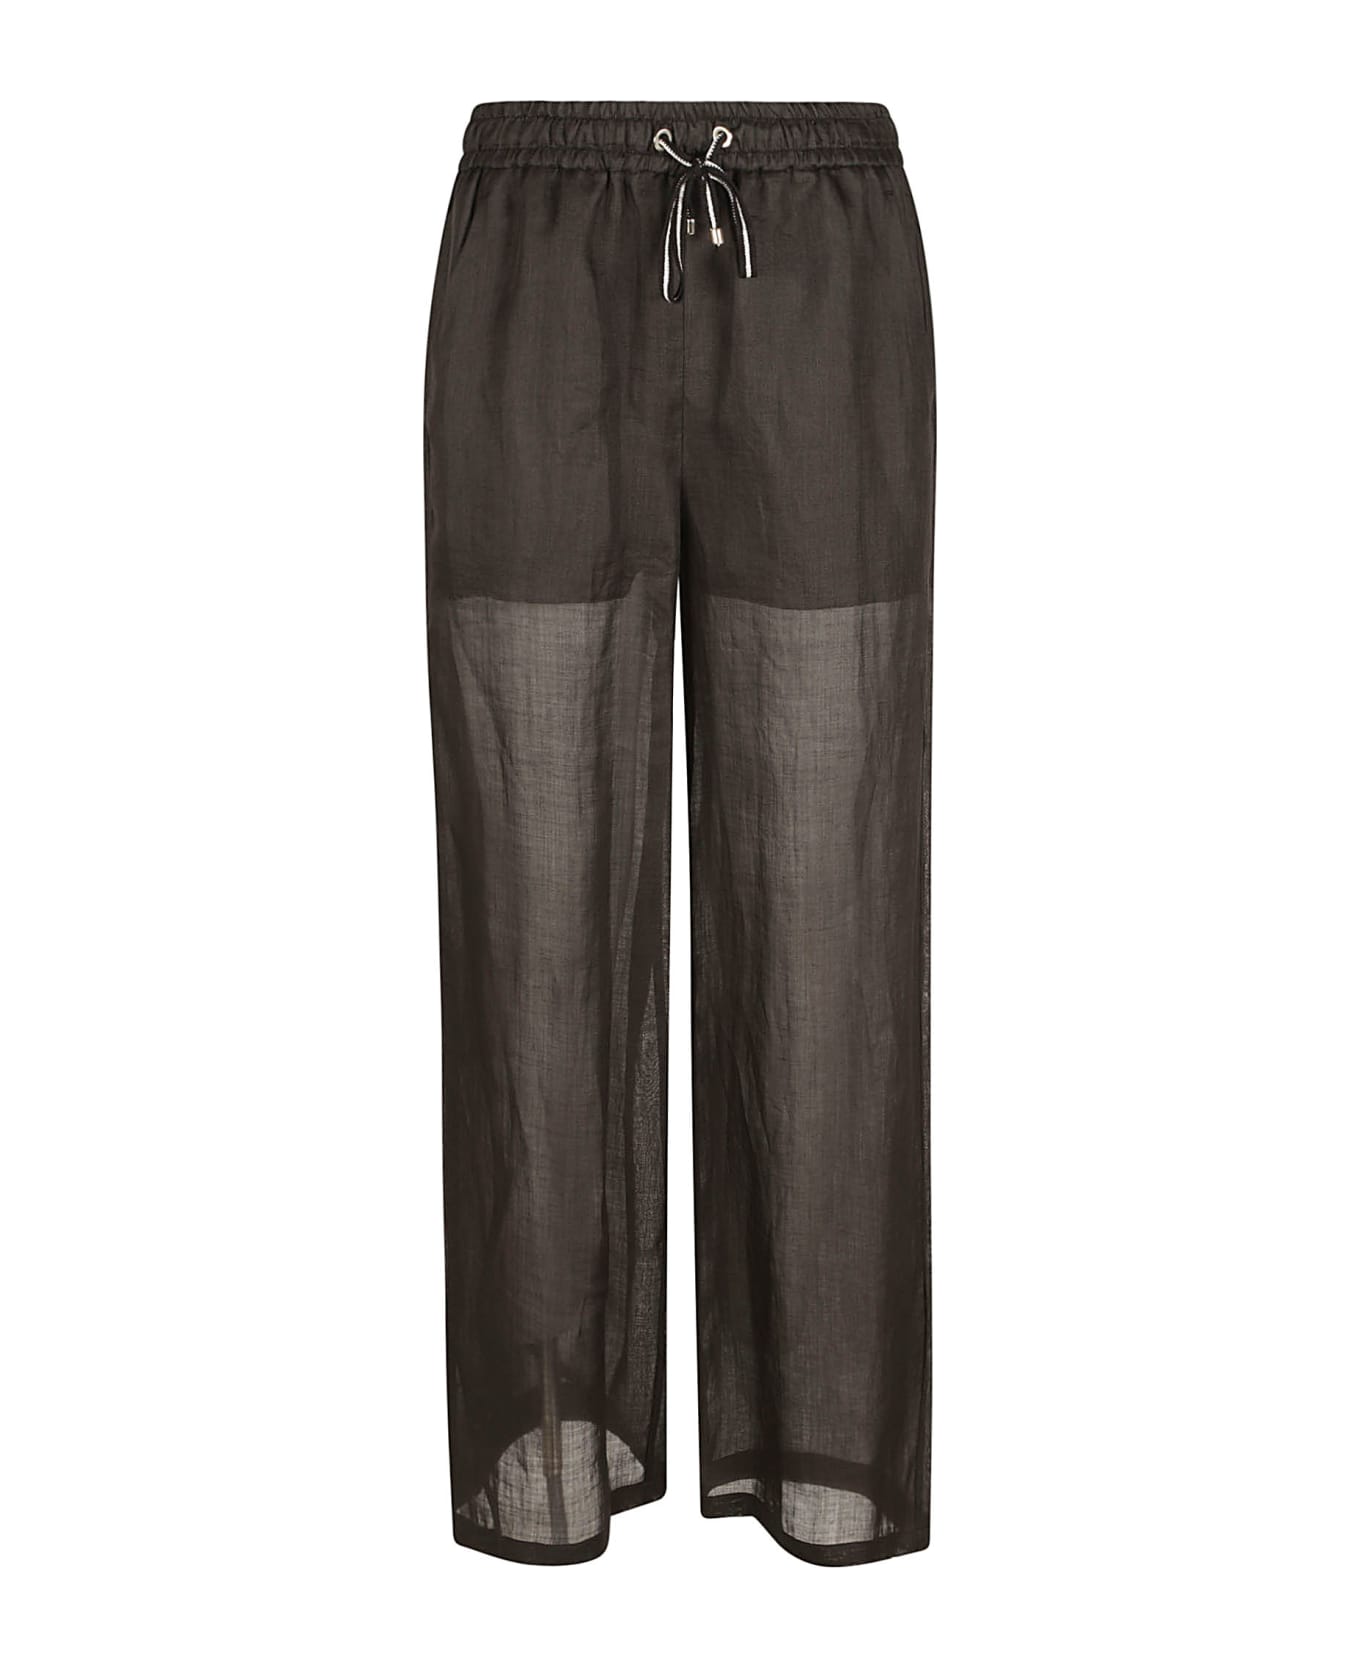 Lorena Antoniazzi Straight Laced Trousers - Black ボトムス